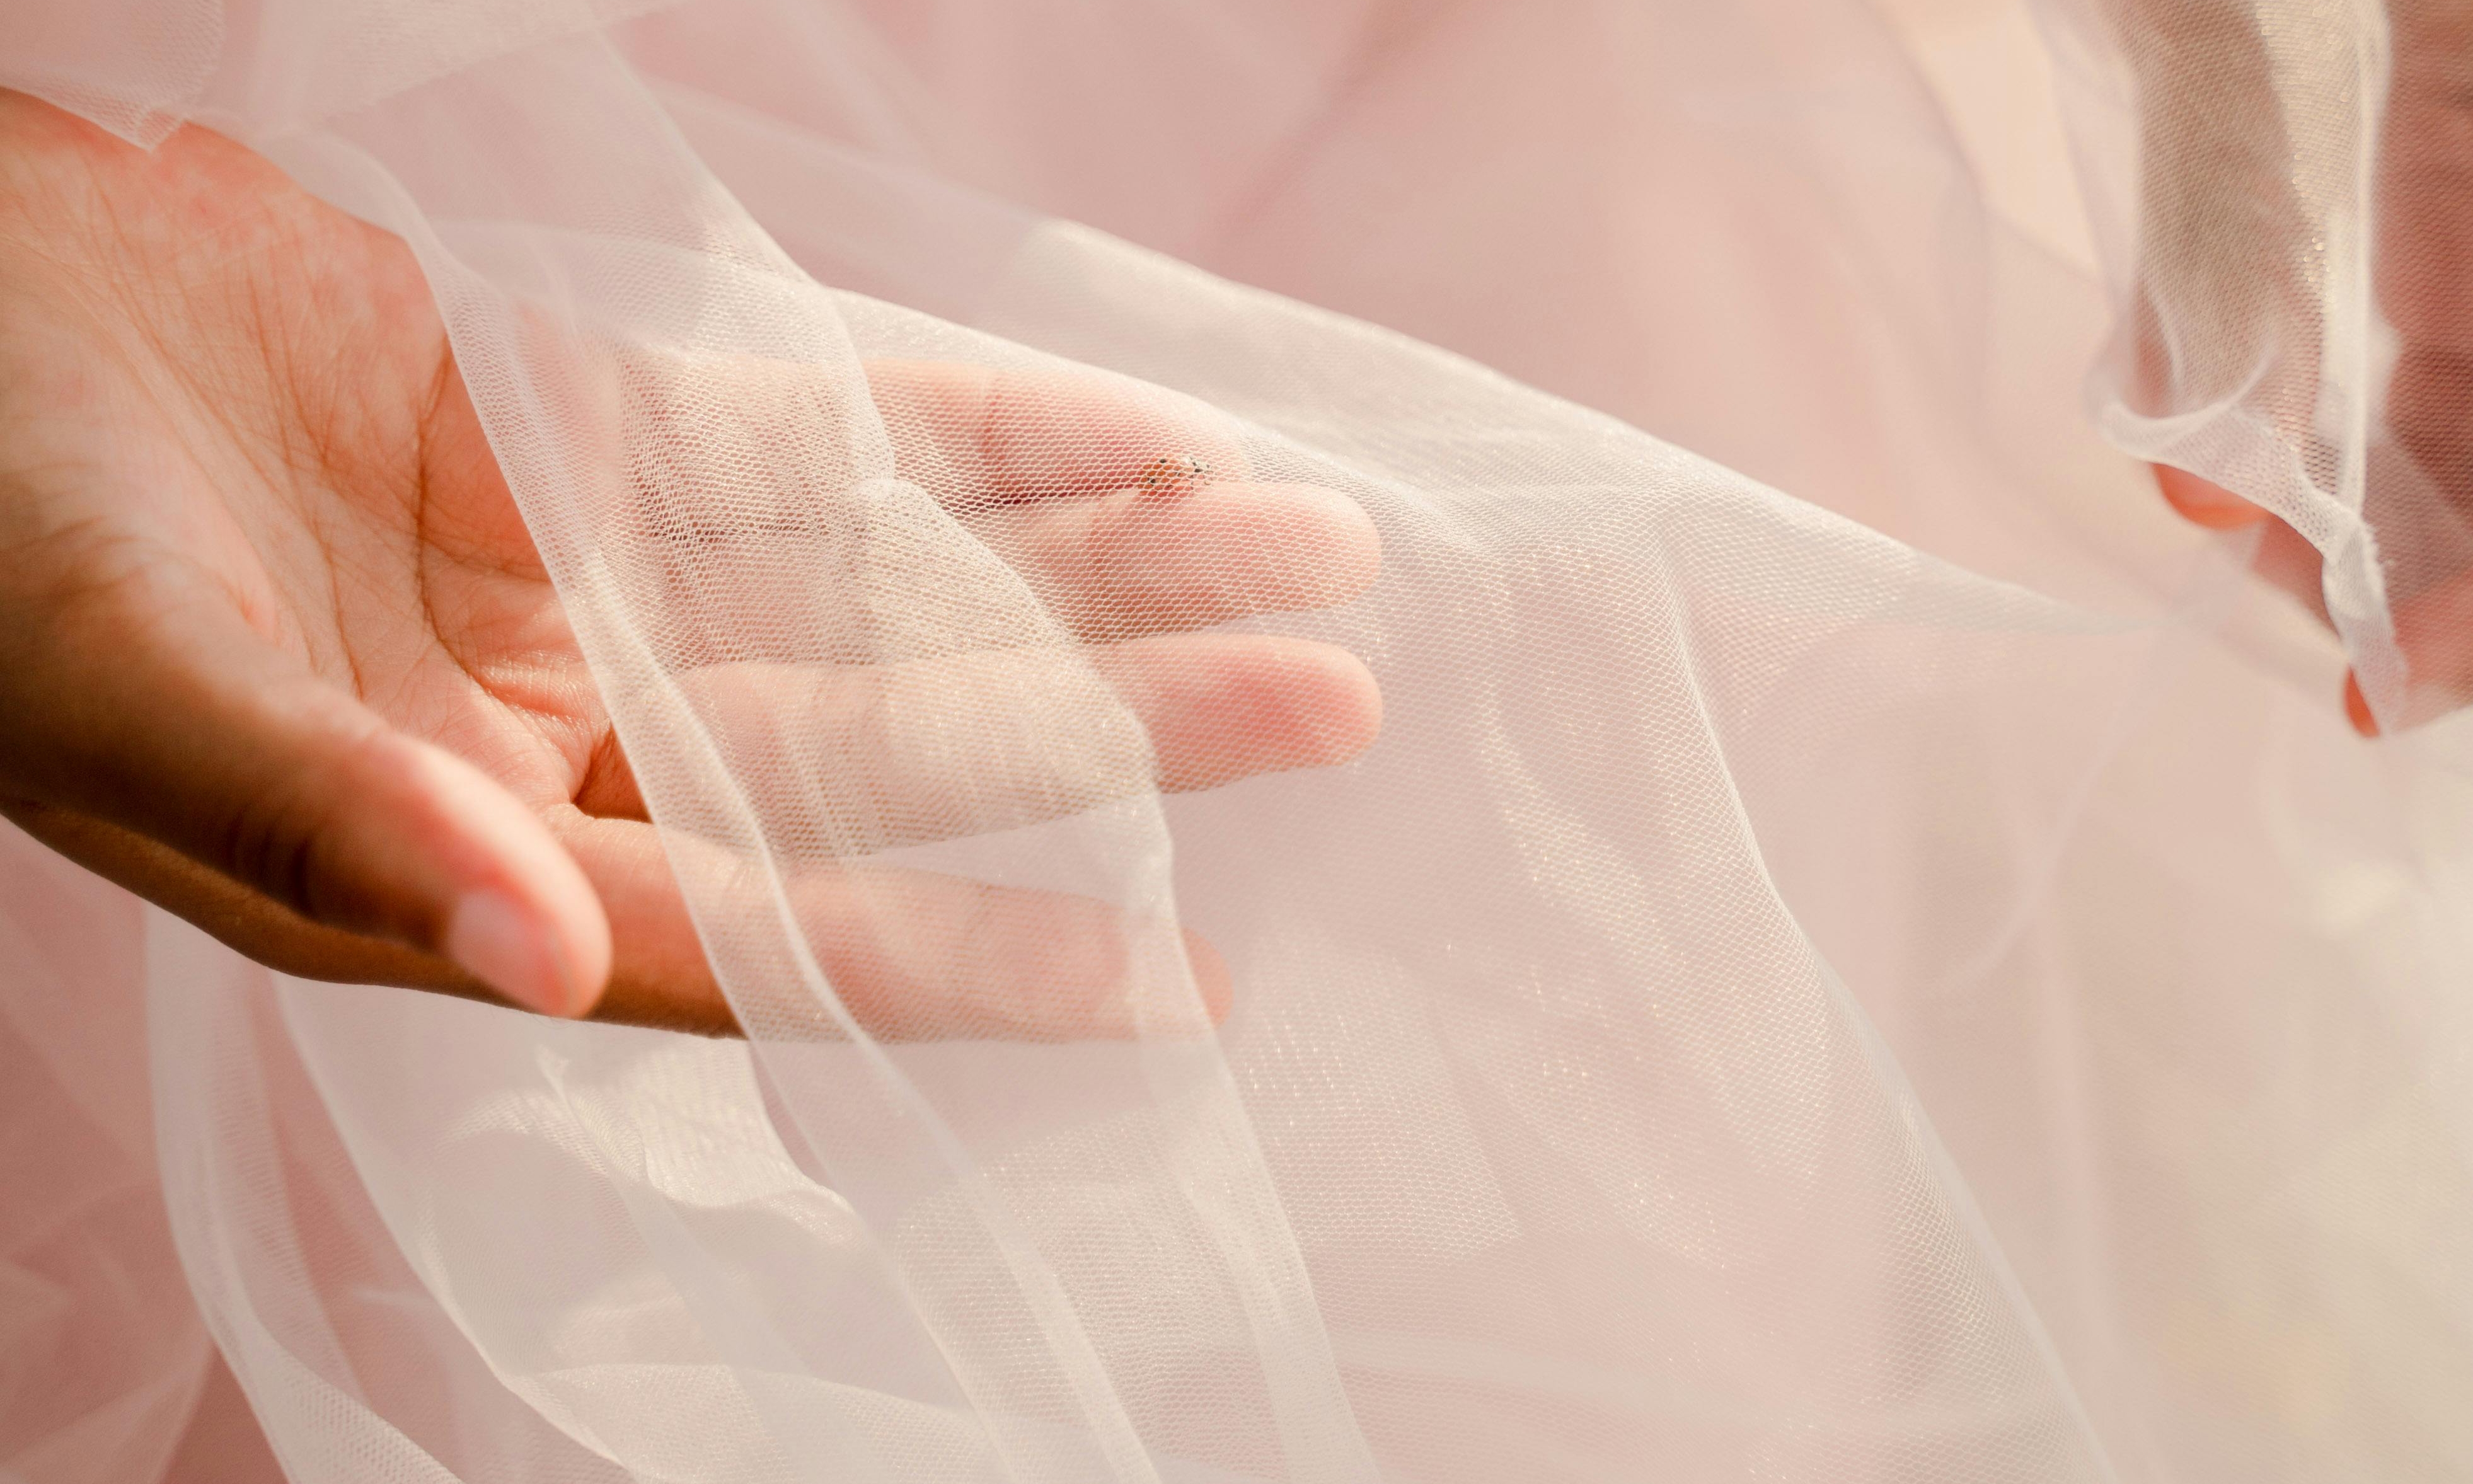 The bridesmaid dresses exhibiting pastel shades and intricate lacework | Source: Pexels